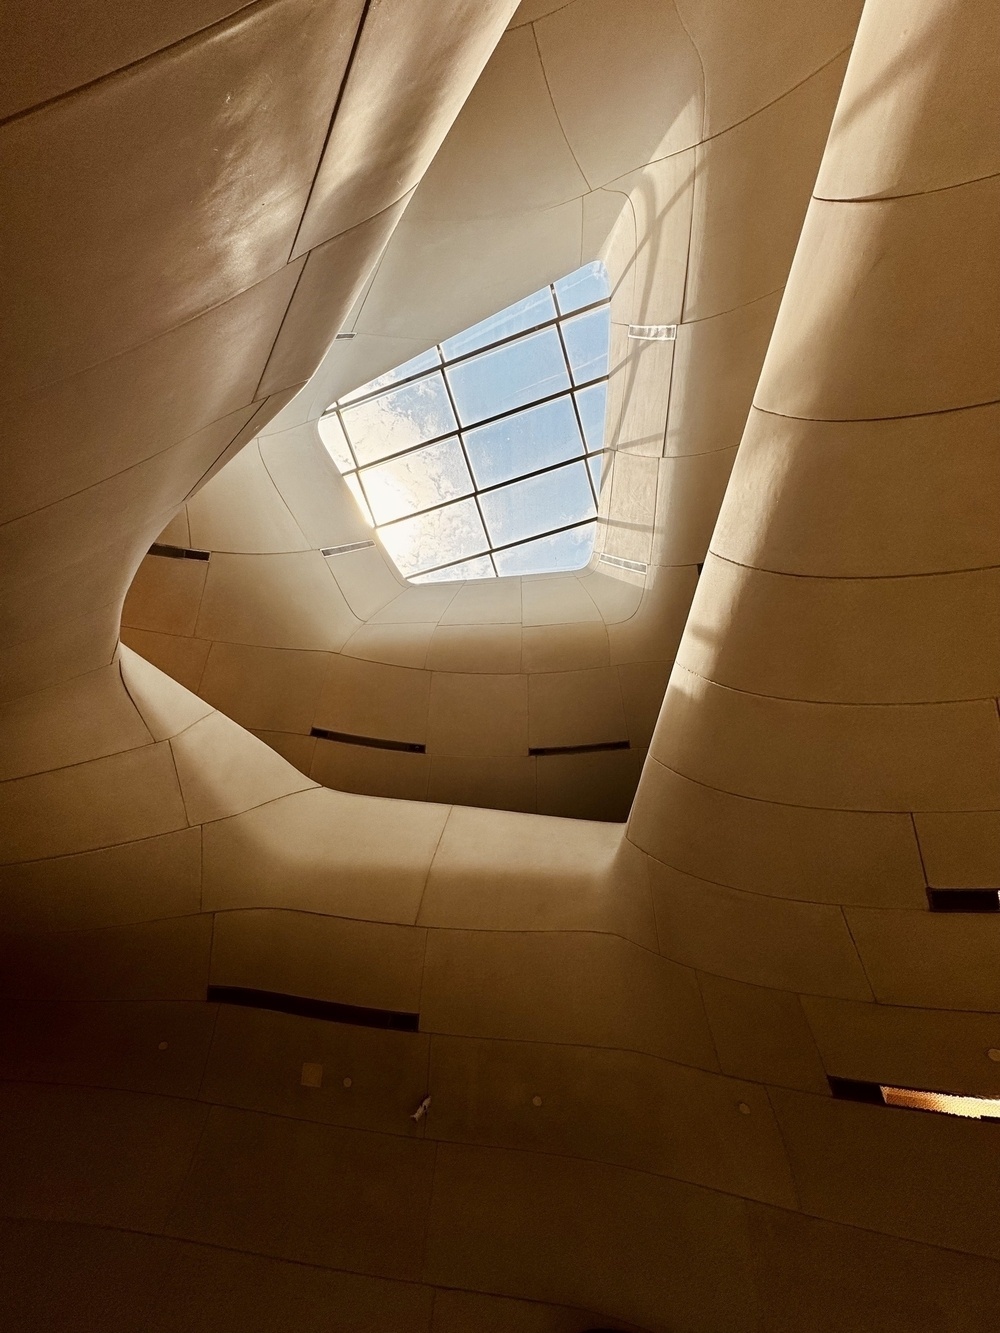 Skylight window illuminates undulating beige walls and ceiling, blending organic curves and sharp lines, with scattered square and round vents, creating a futuristic architectural interior under a blue sky.